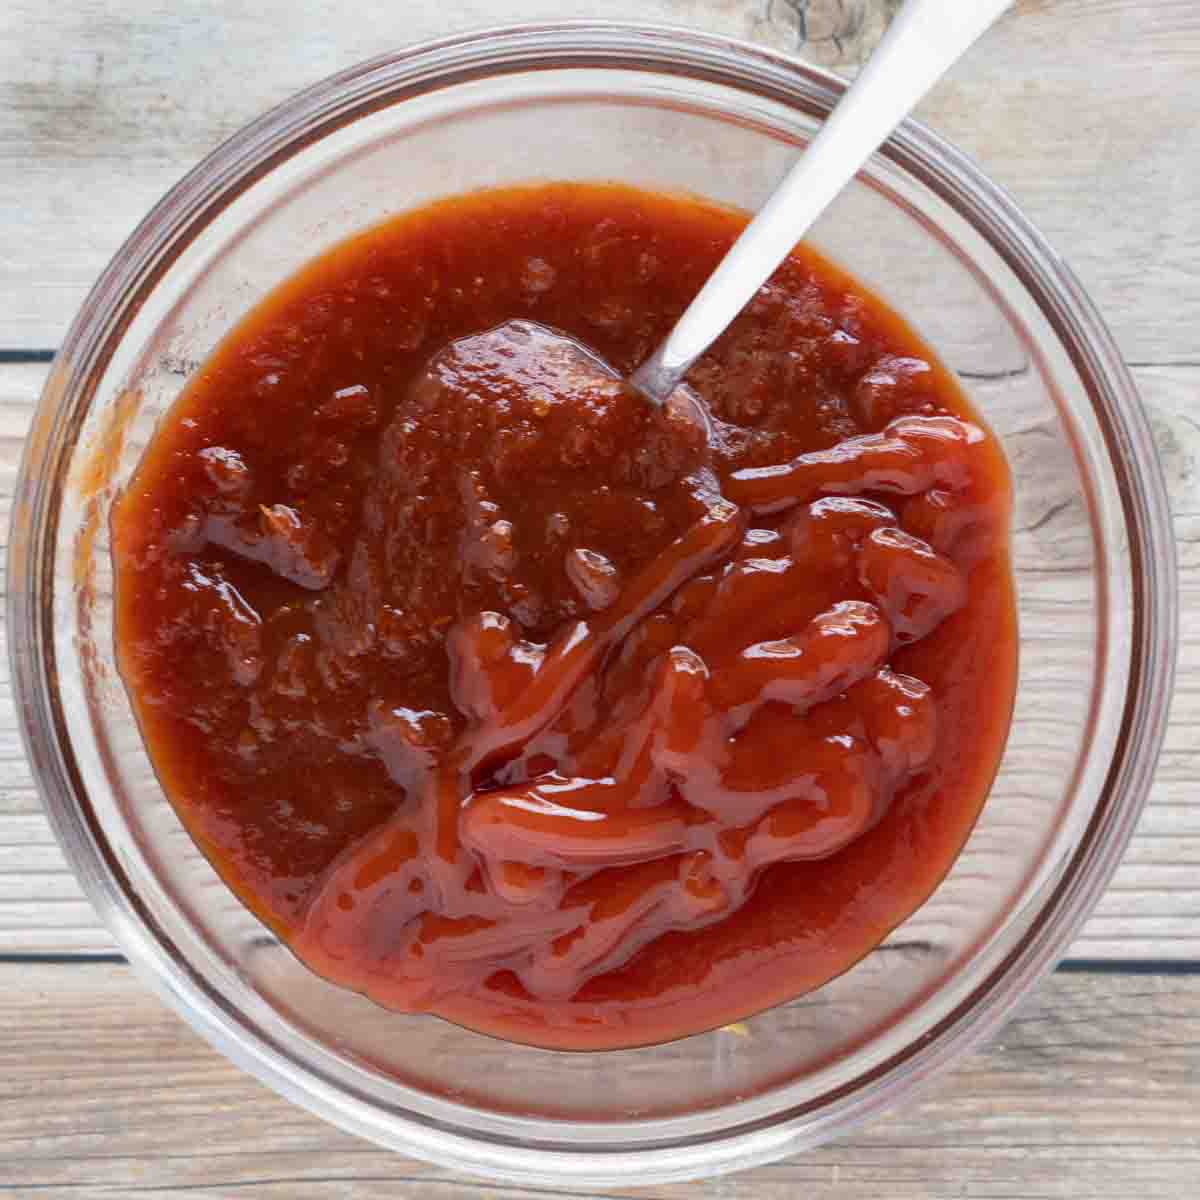 ketchup and chili sauce in a glass bowl with spoon.